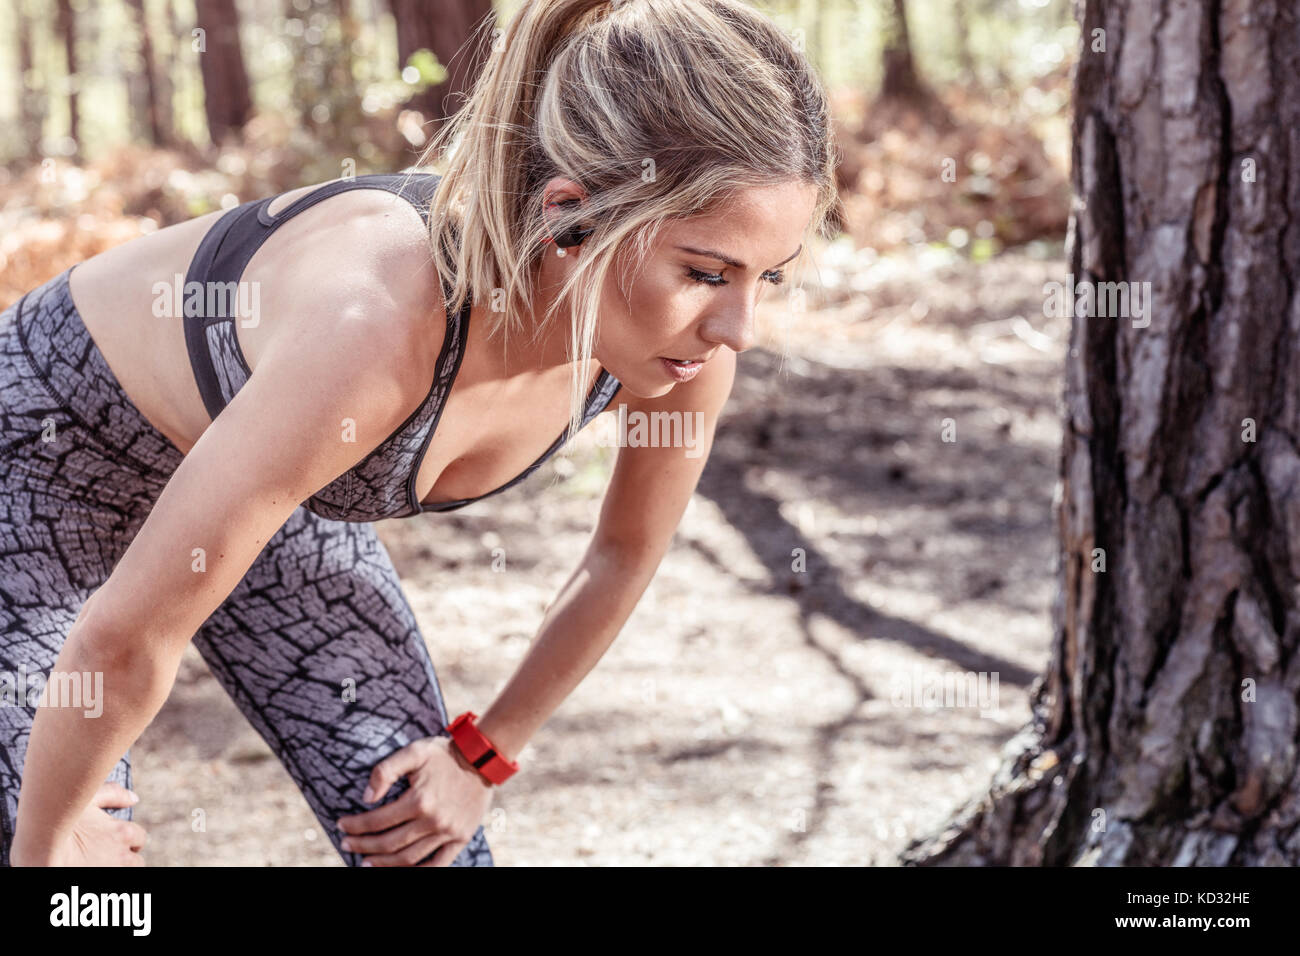 Young woman in rural setting, wearing sports clothing, hands on knees Stock Photo